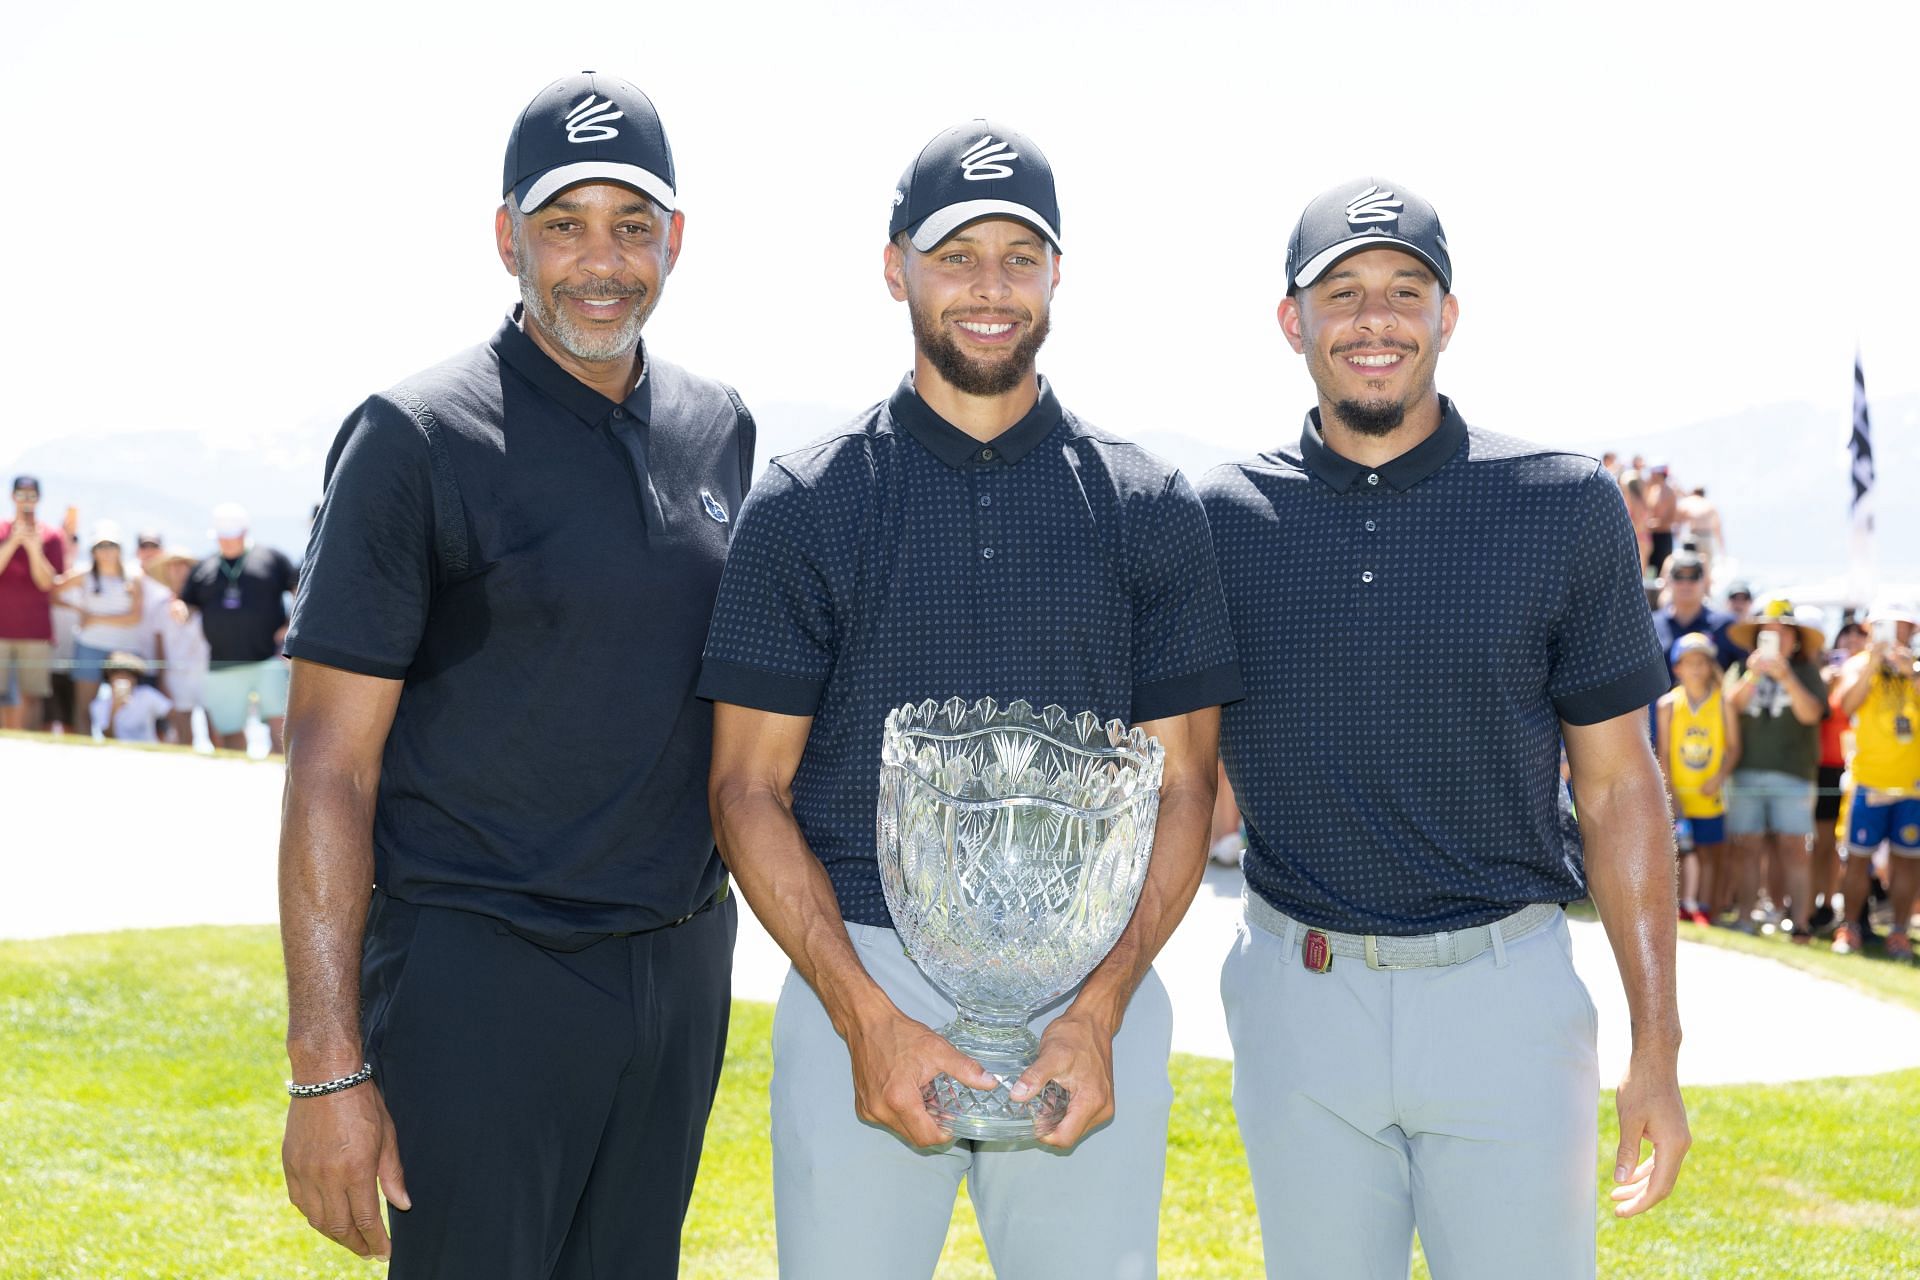 Dell Curry (right) with his children after Steph Curry (middle) won the American Century Championship